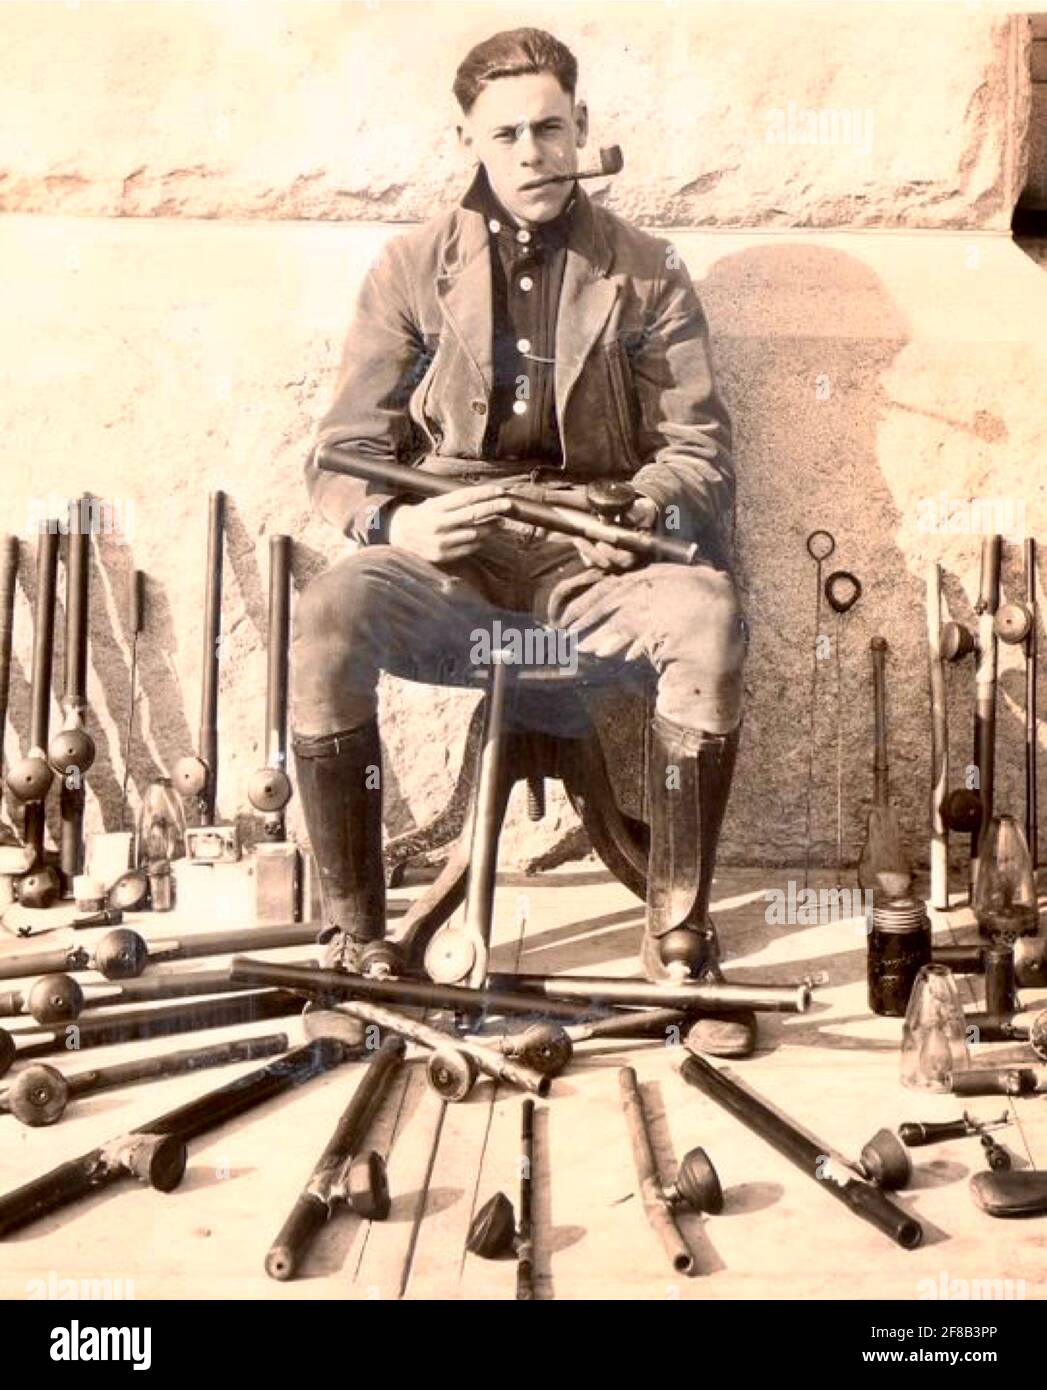 Police officer poses with opium pipes, lamps and other paraphernalia confiscated at opium den raids in San Francisco early 1900's Stock Photo